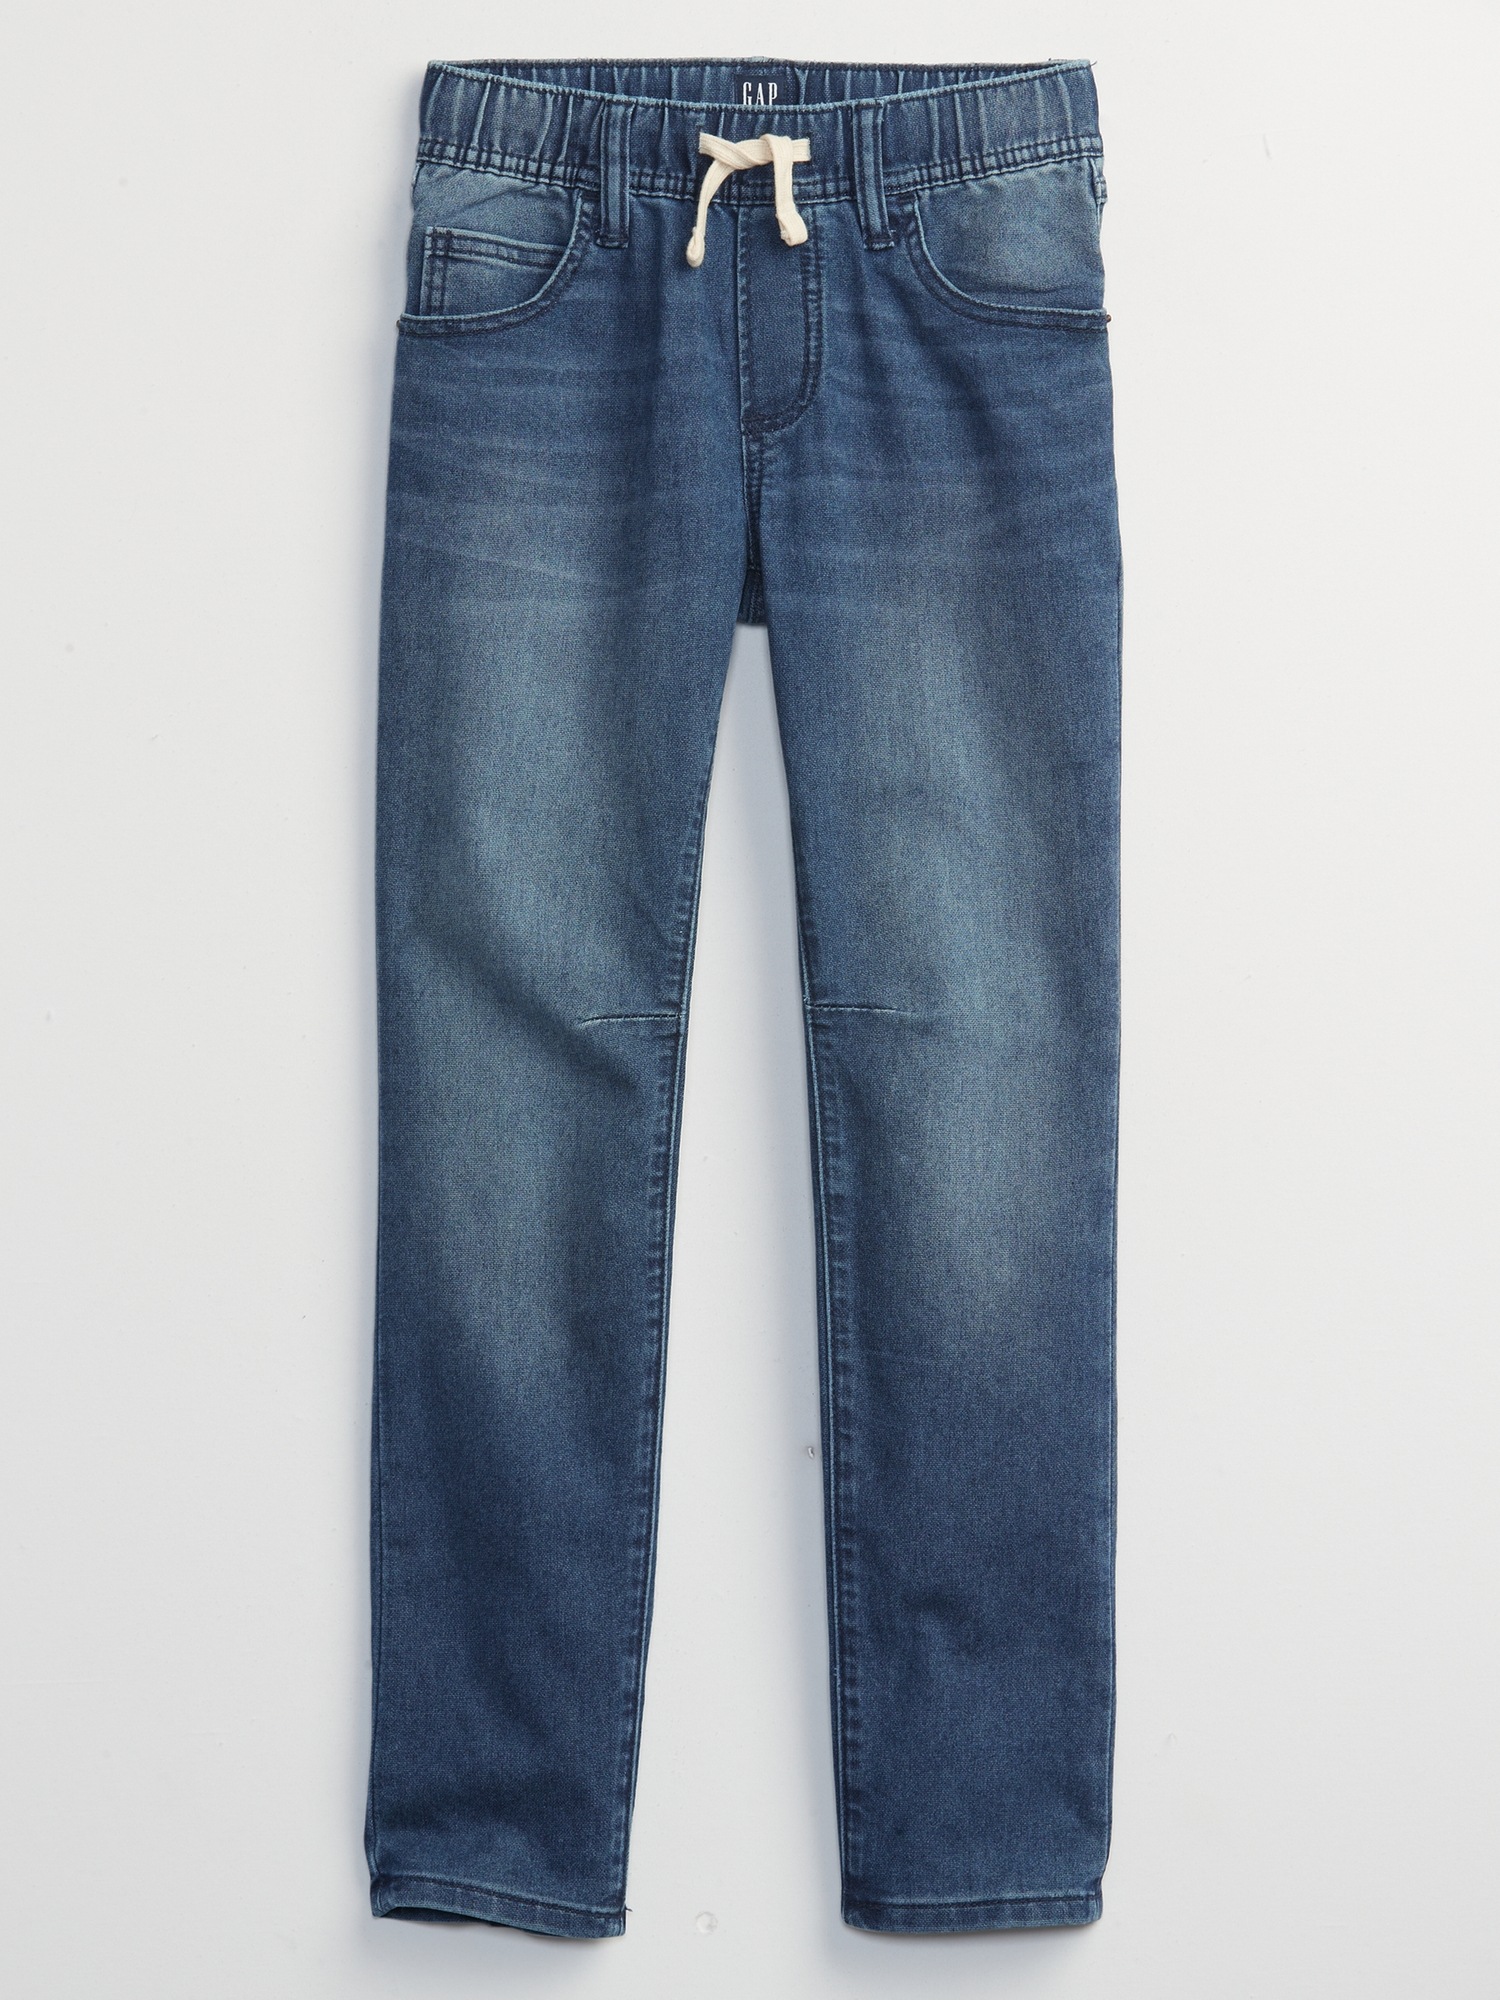 Kids Pull-On Slim Jeans with Washwell | Gap Factory